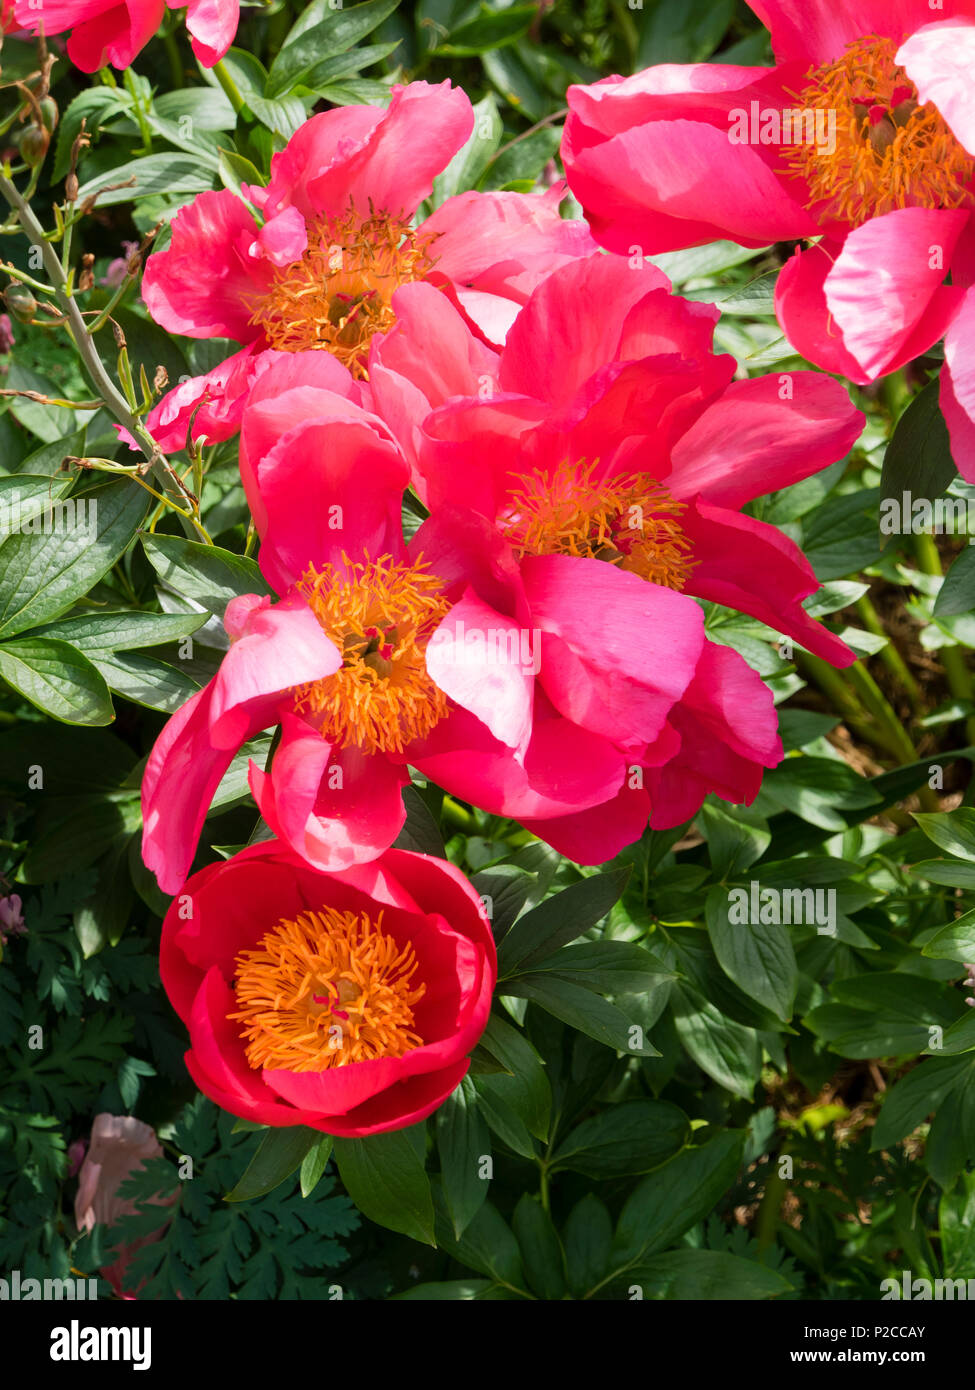 Newly open and mature red single flowers of the hardy herbaceous species peony, Paeonia peregrina 'Flame' Stock Photo